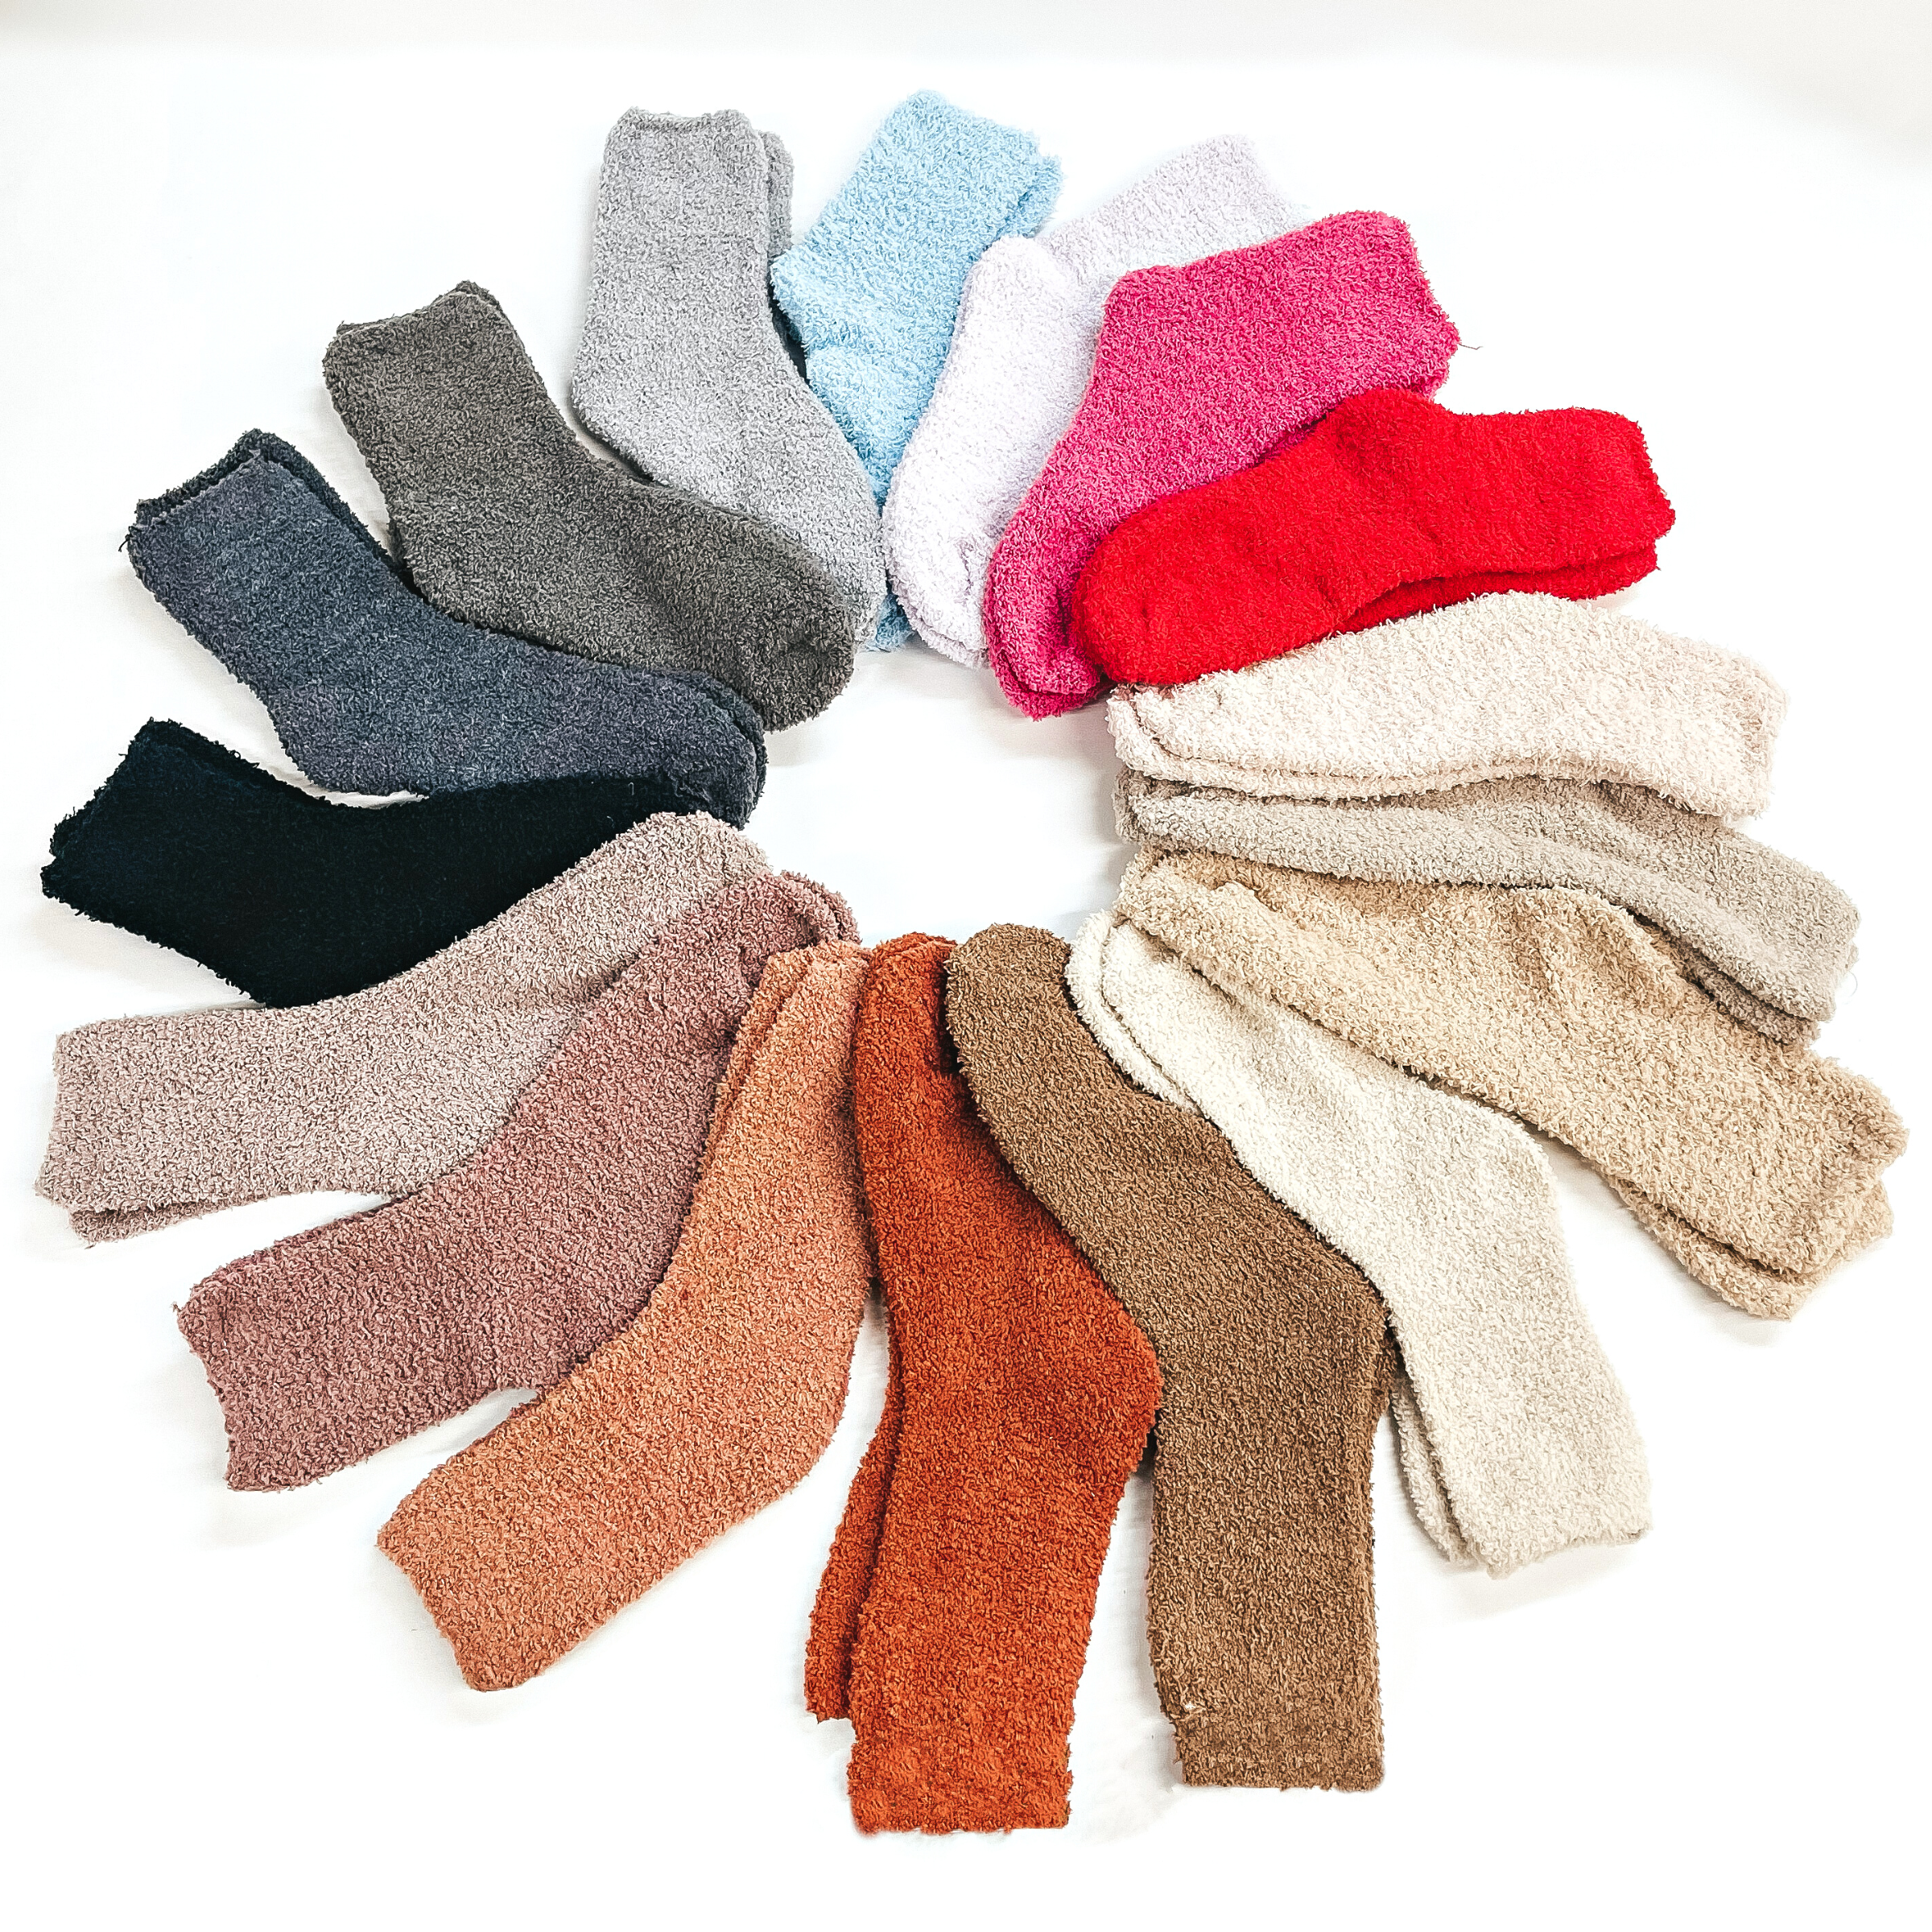 There are seventeen pair of fuzzy socks in assorted colors such as different shades  of grey's, pink/mauve's, nudes/browns, and bright colors such as red, light purple,  and light blue. These pair of socks are taken on a white background and made into a  circle/spiral.